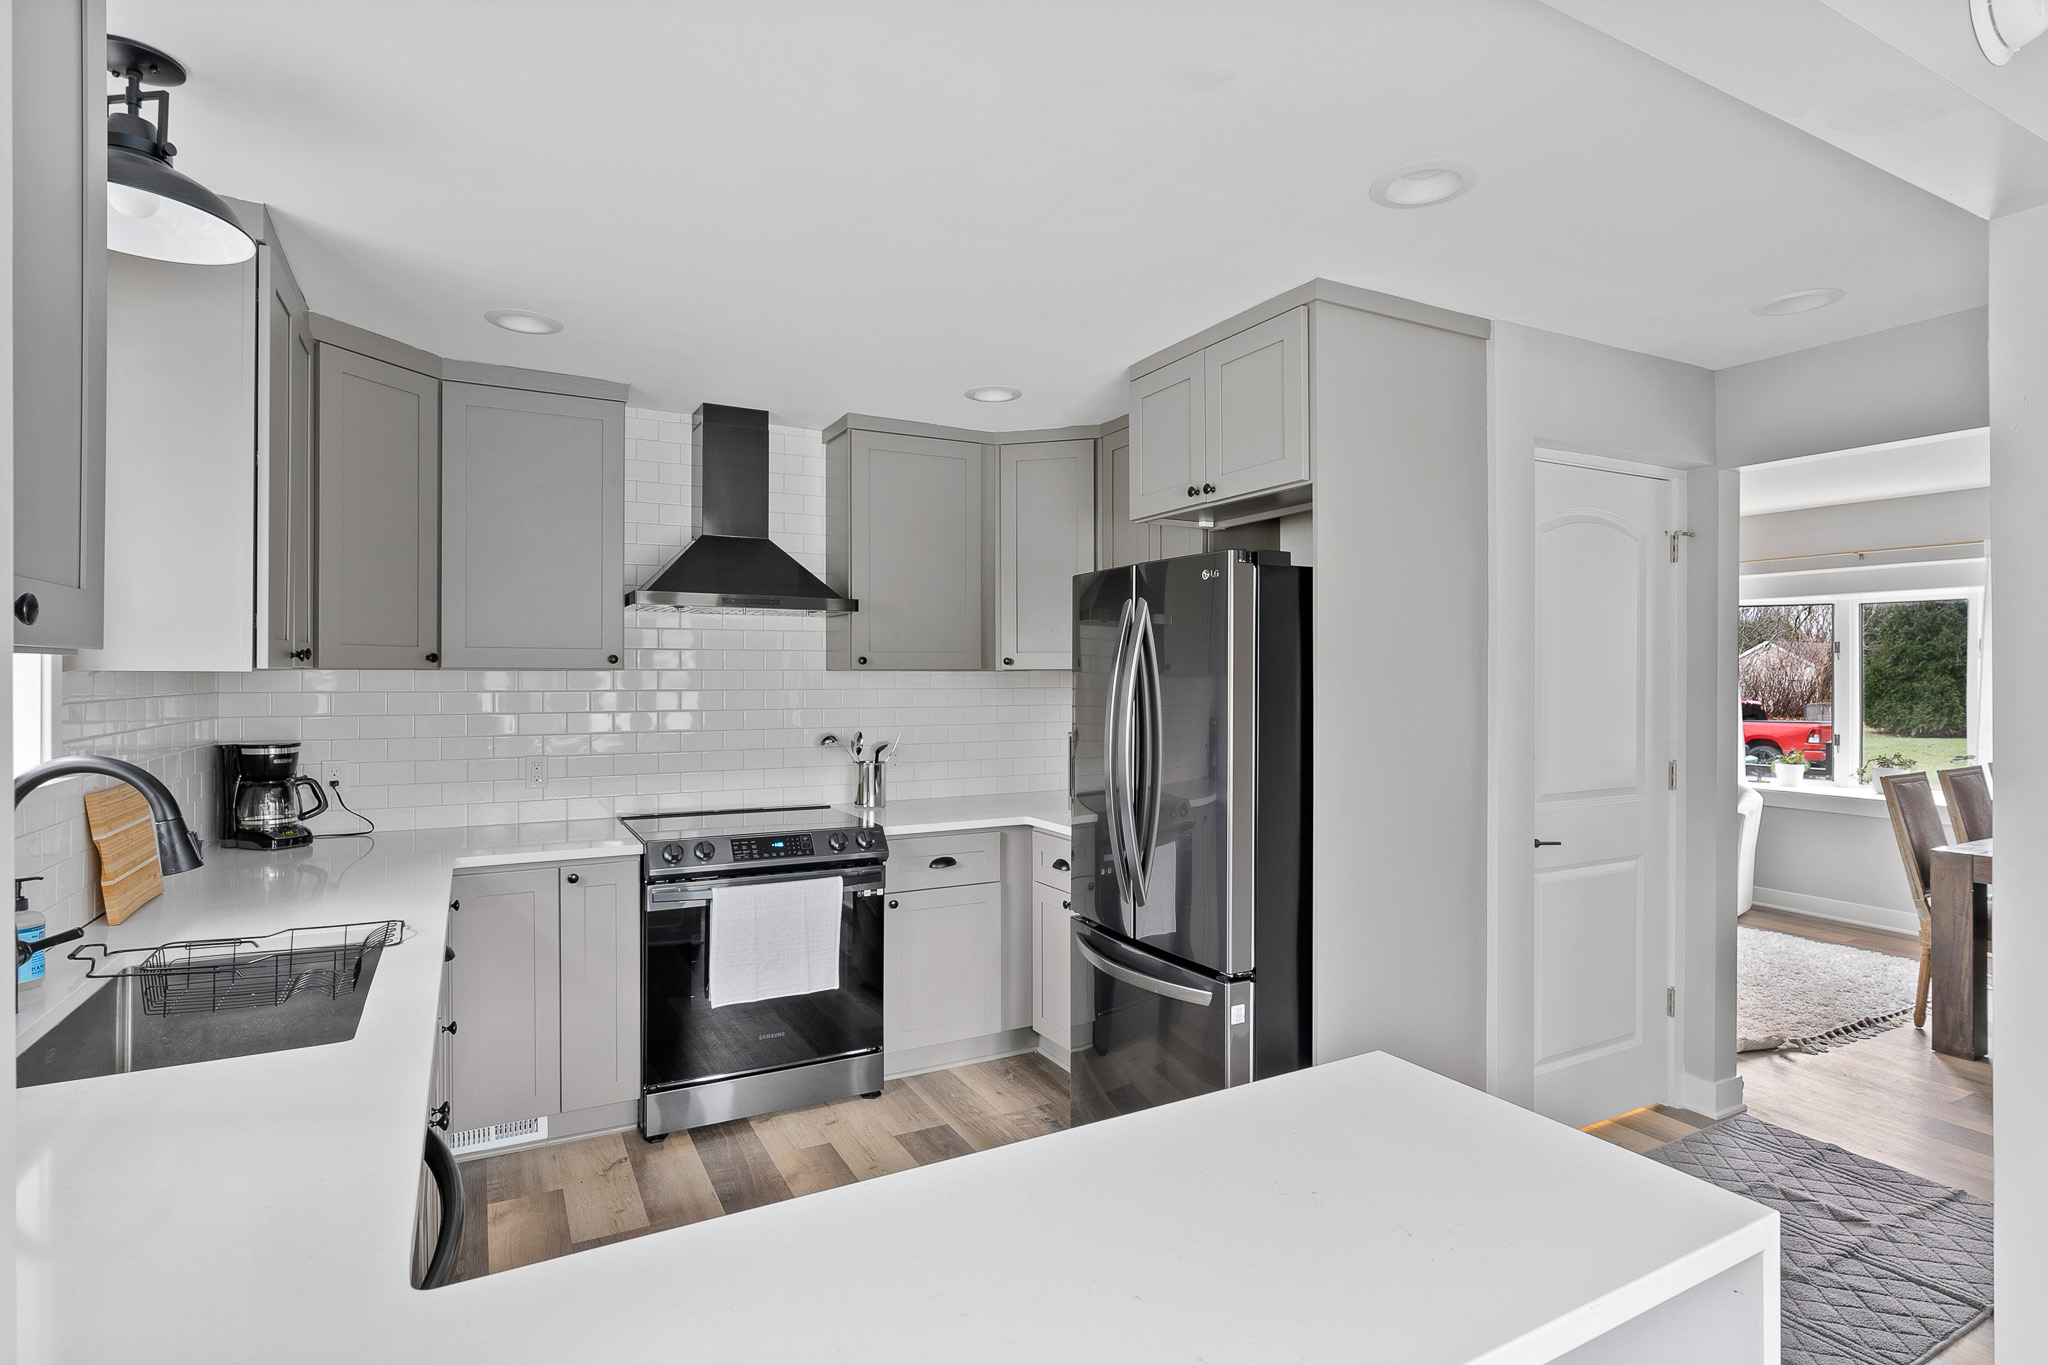 Beautiful kitchen remodel in the Whitefish Bay, Wisconsin area by JB Custom Drywall